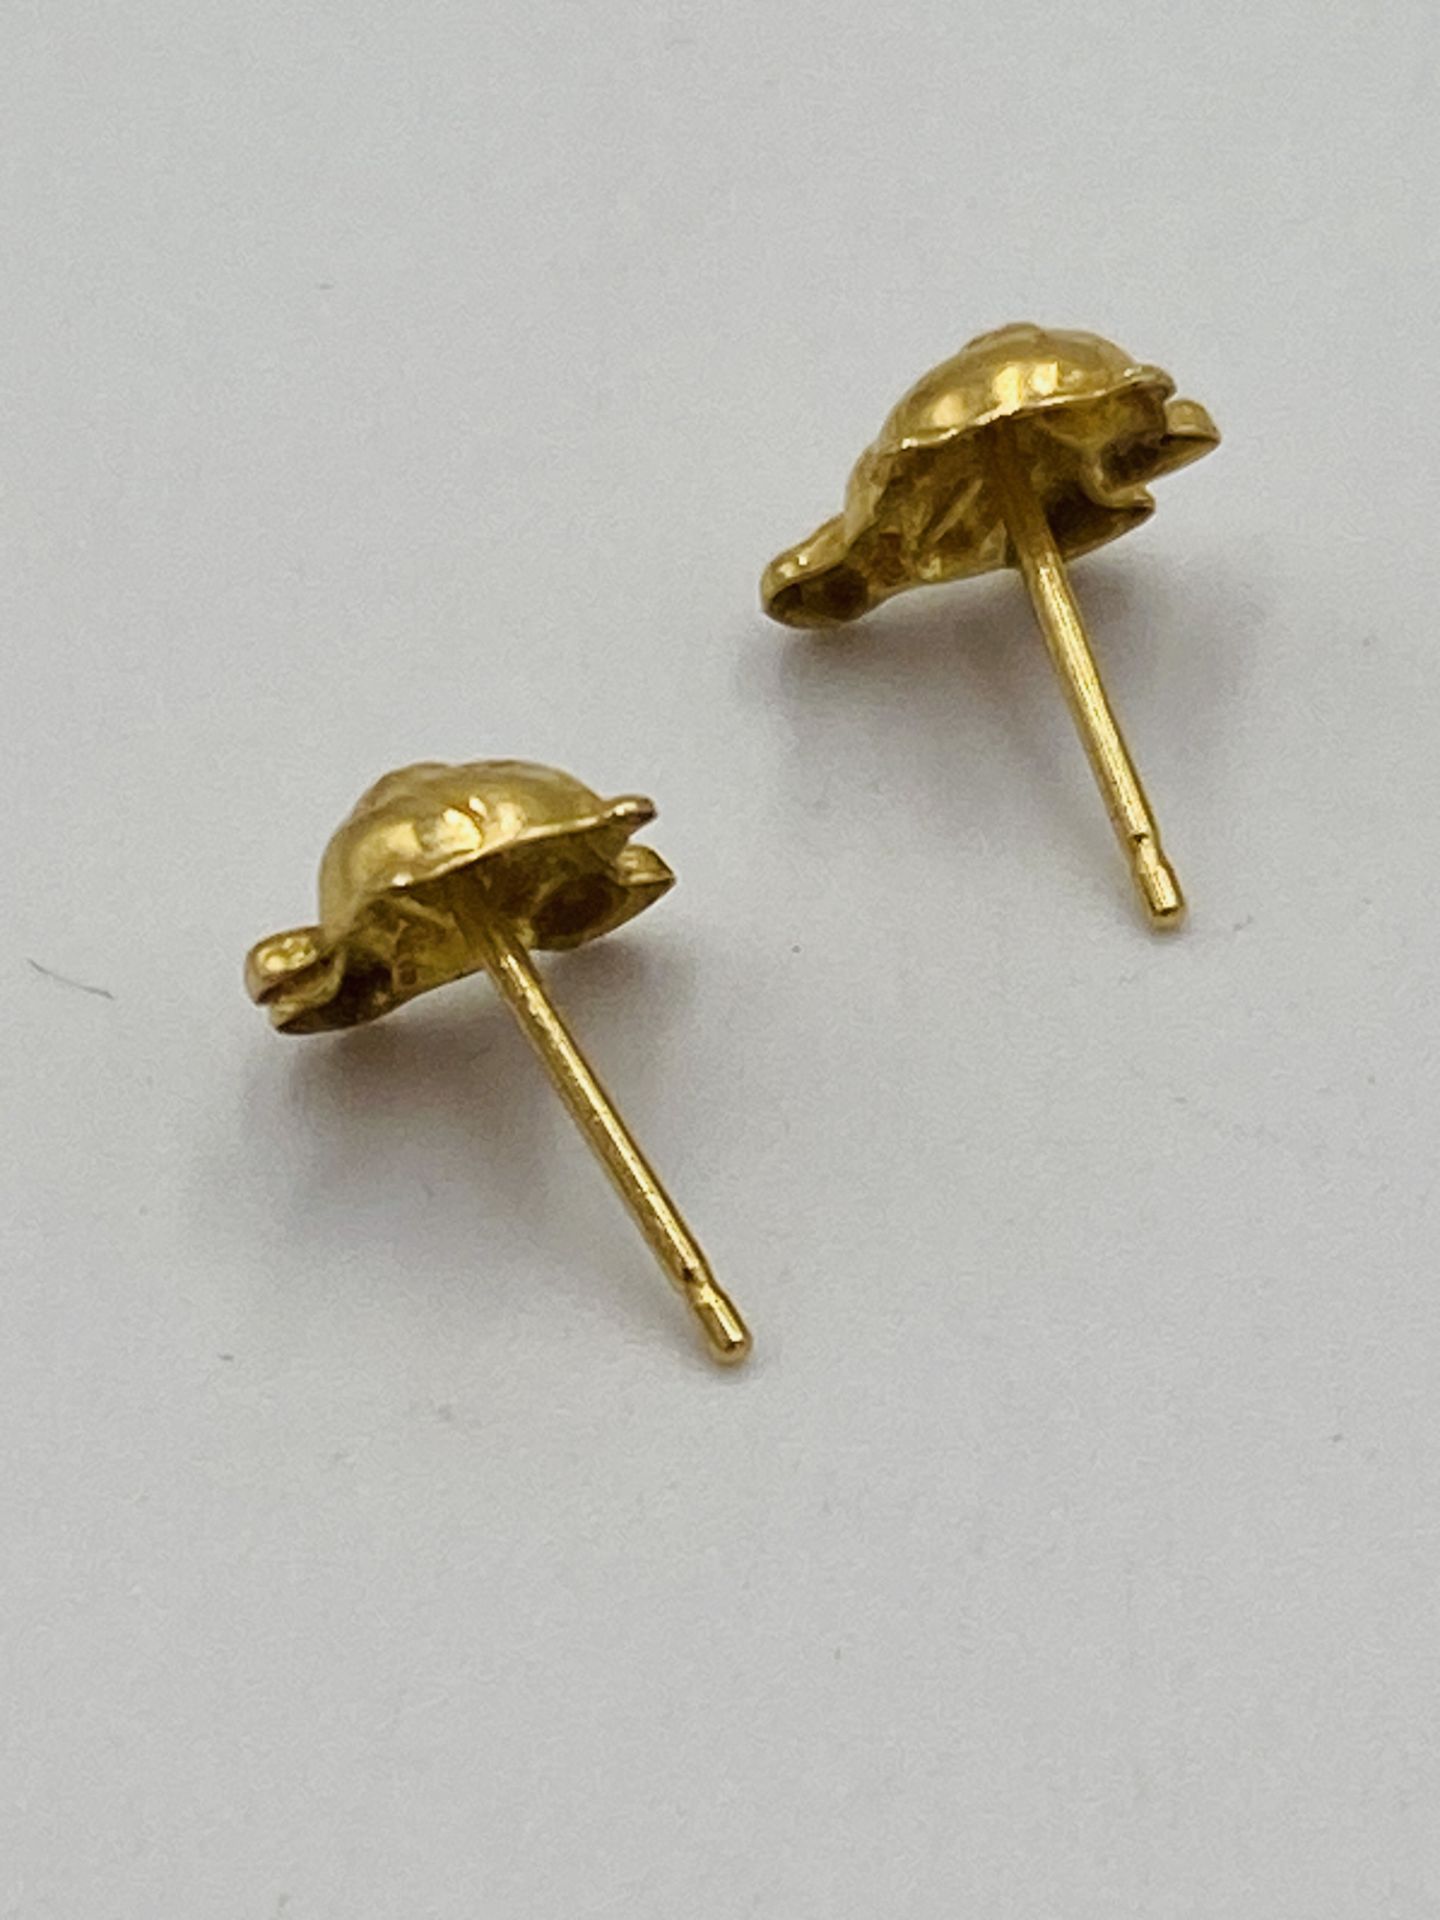 Pair of 9ct gold earrings - Image 3 of 3